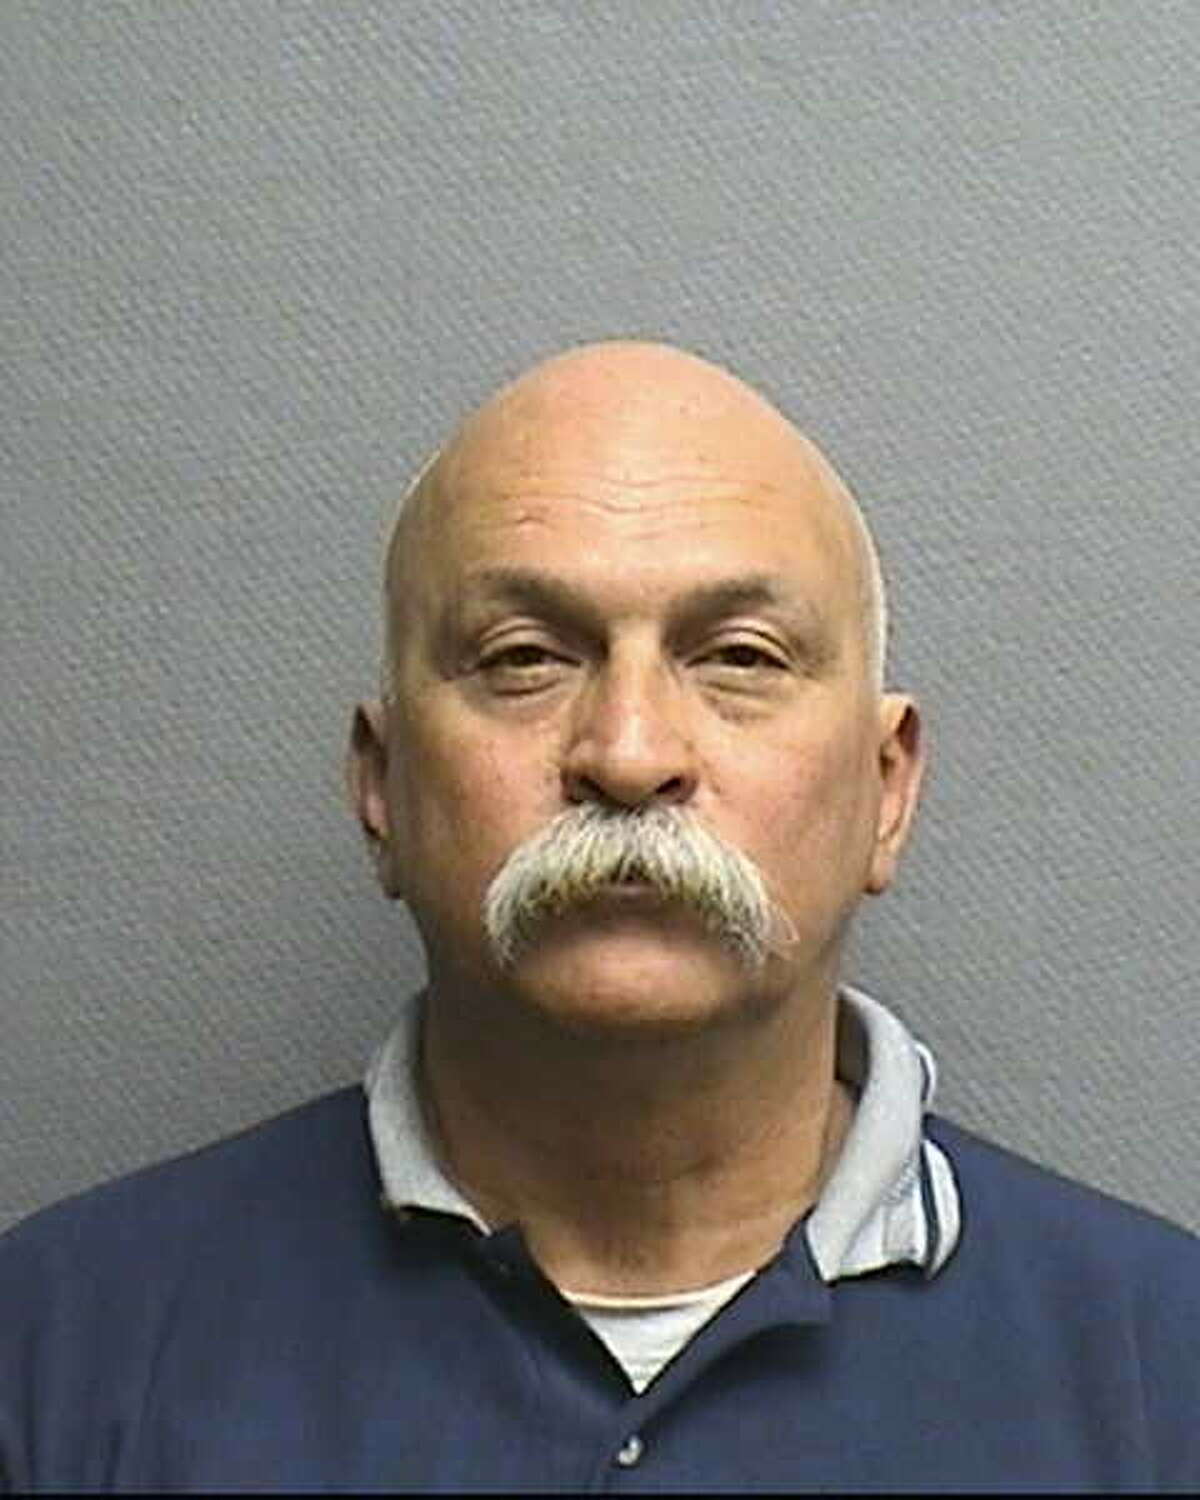 This is a photo of Lawrence Chapa, who was working as a government informant when he was driving a truck that was fatally attacked in Houston. Chapa, 53, was from Houston. This shot is from 2/4/2010 when he was arrested by HPD for possession of a controlled substance. Photo by HPD